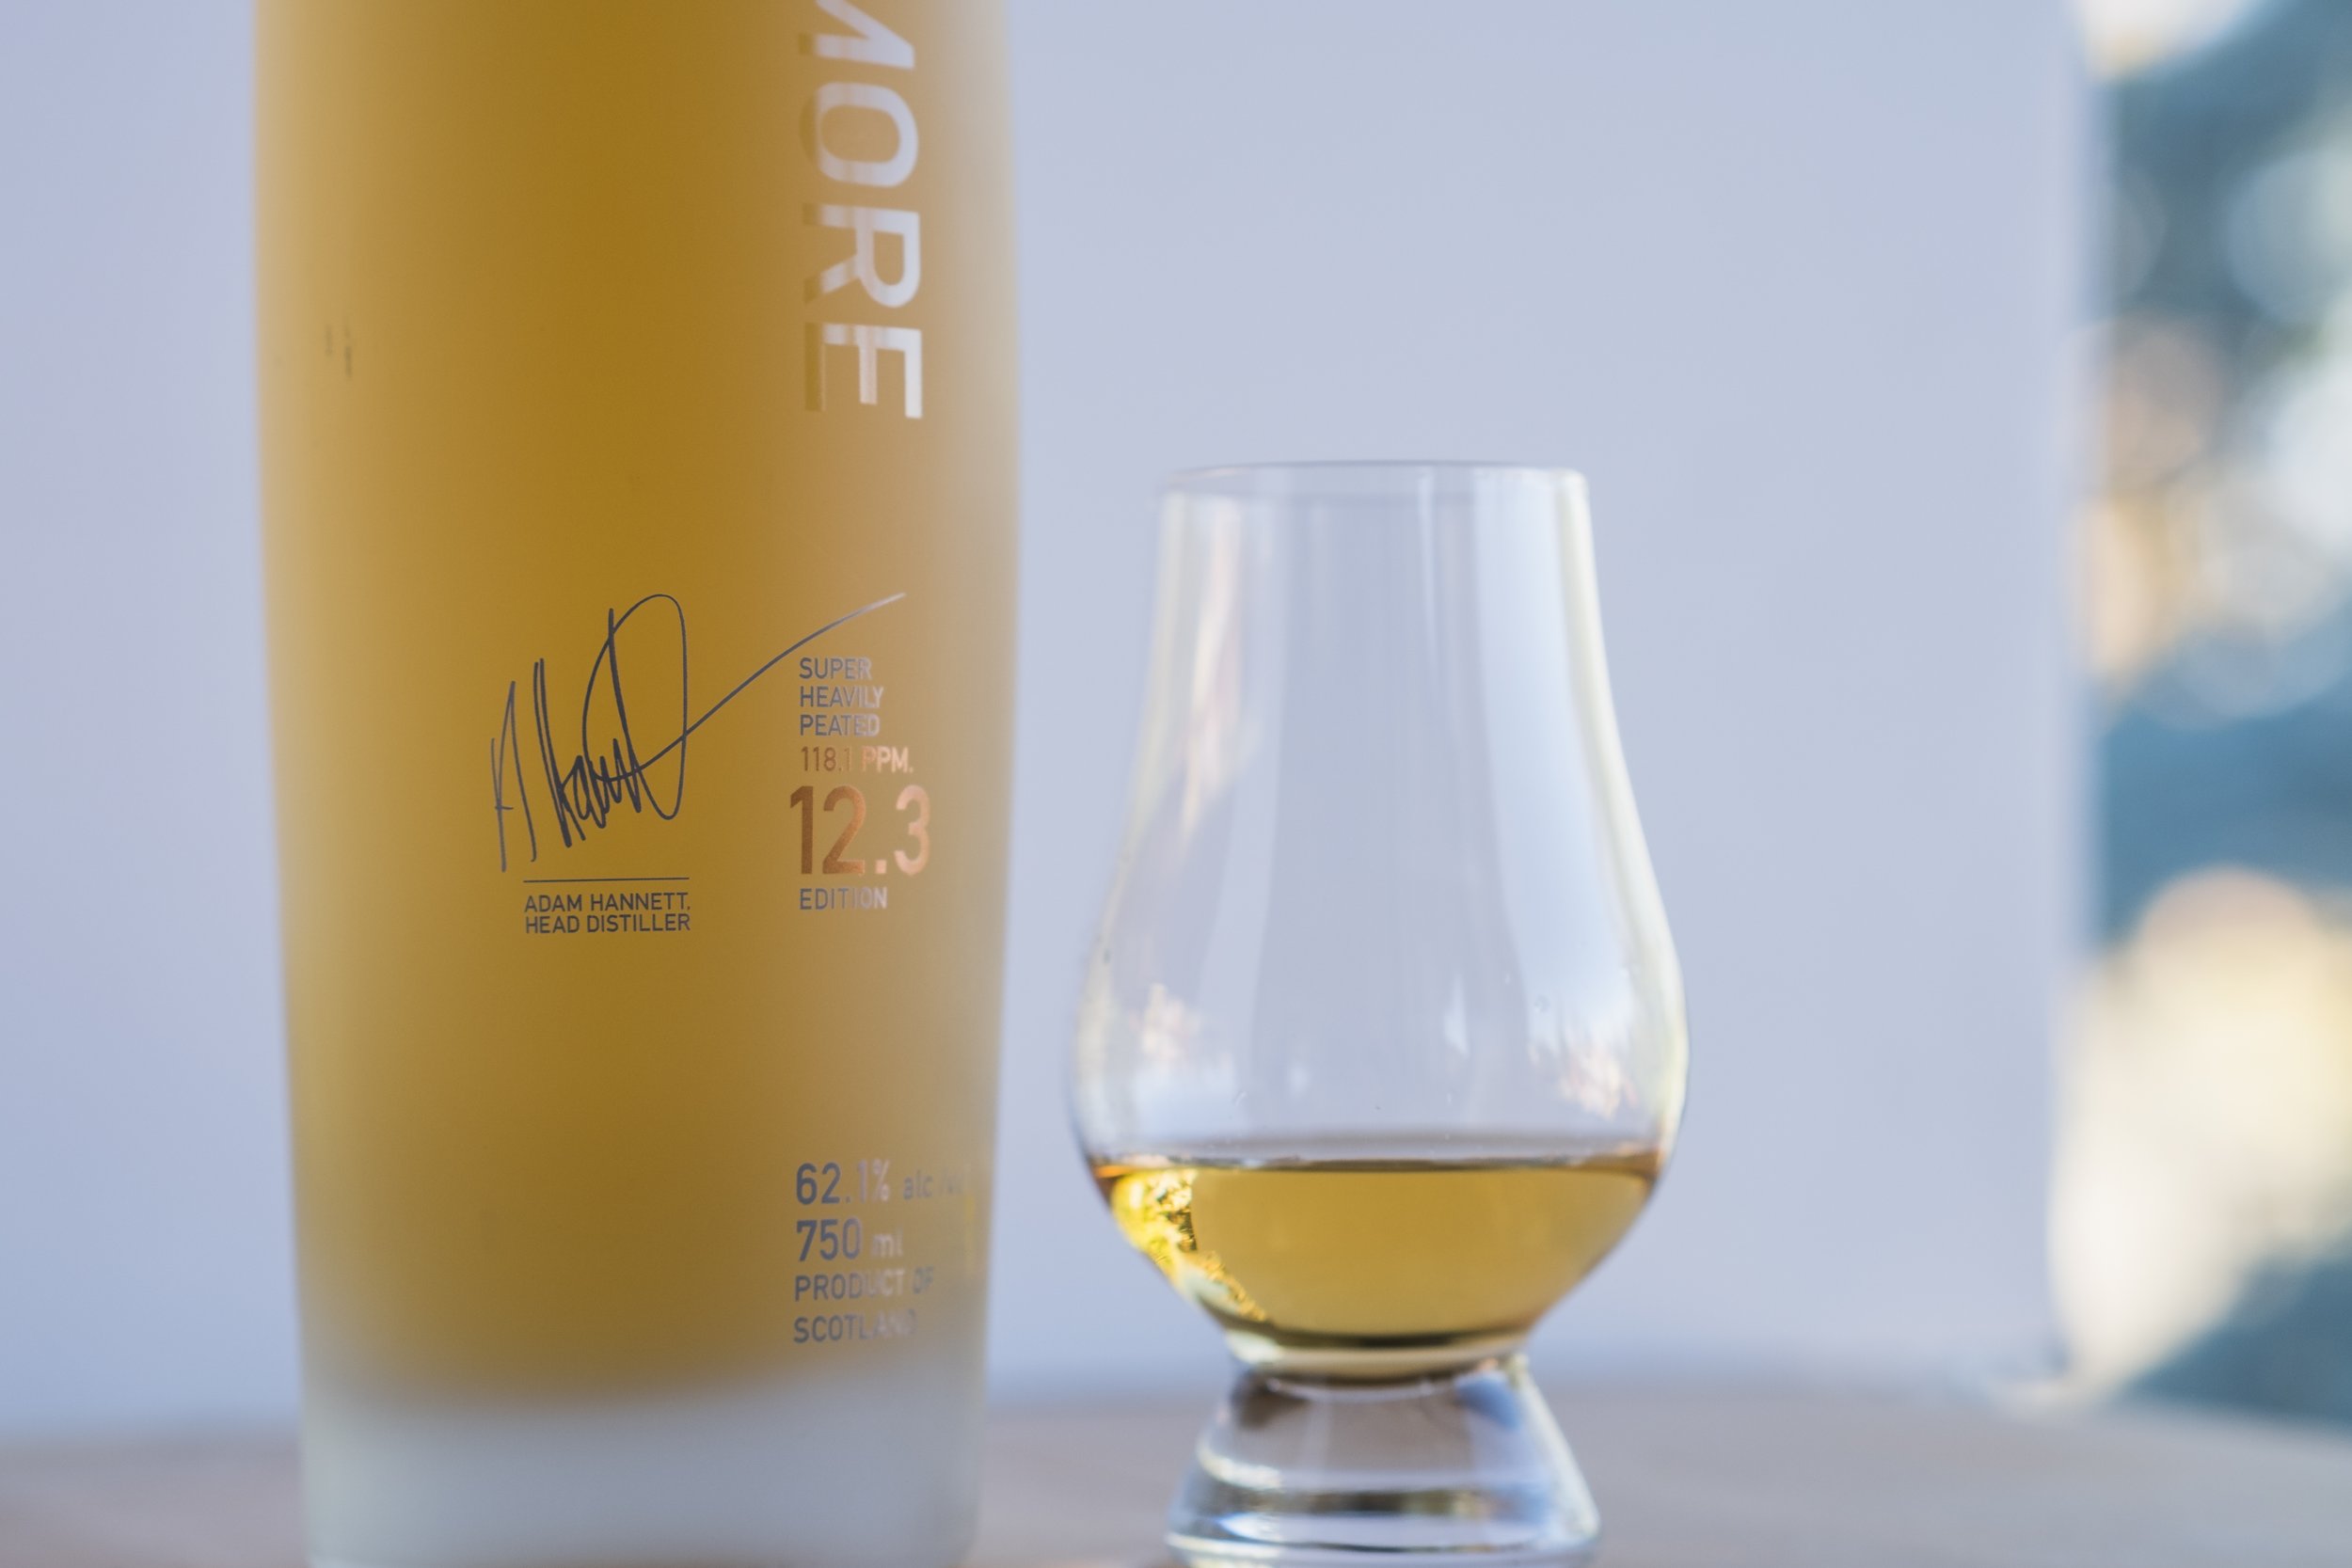 Octomore 12.3_with dram_01.jpg